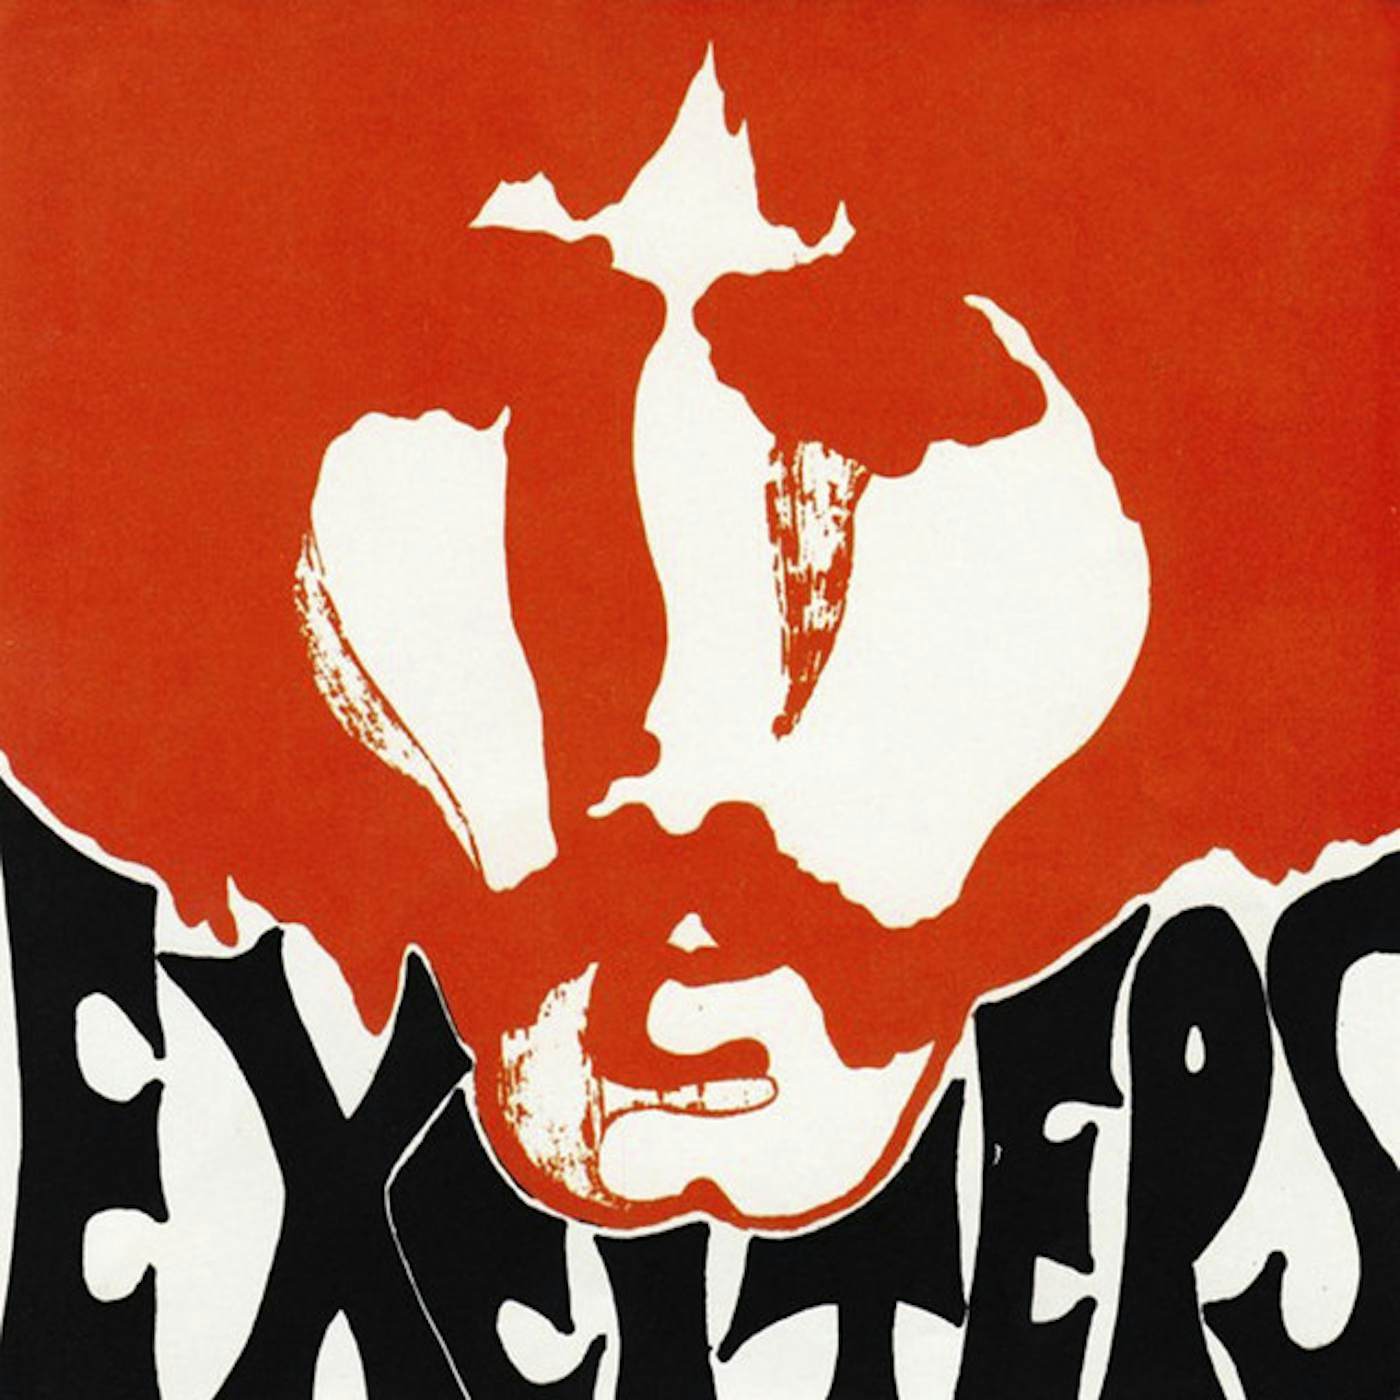 The Exciters IN STEREO CD